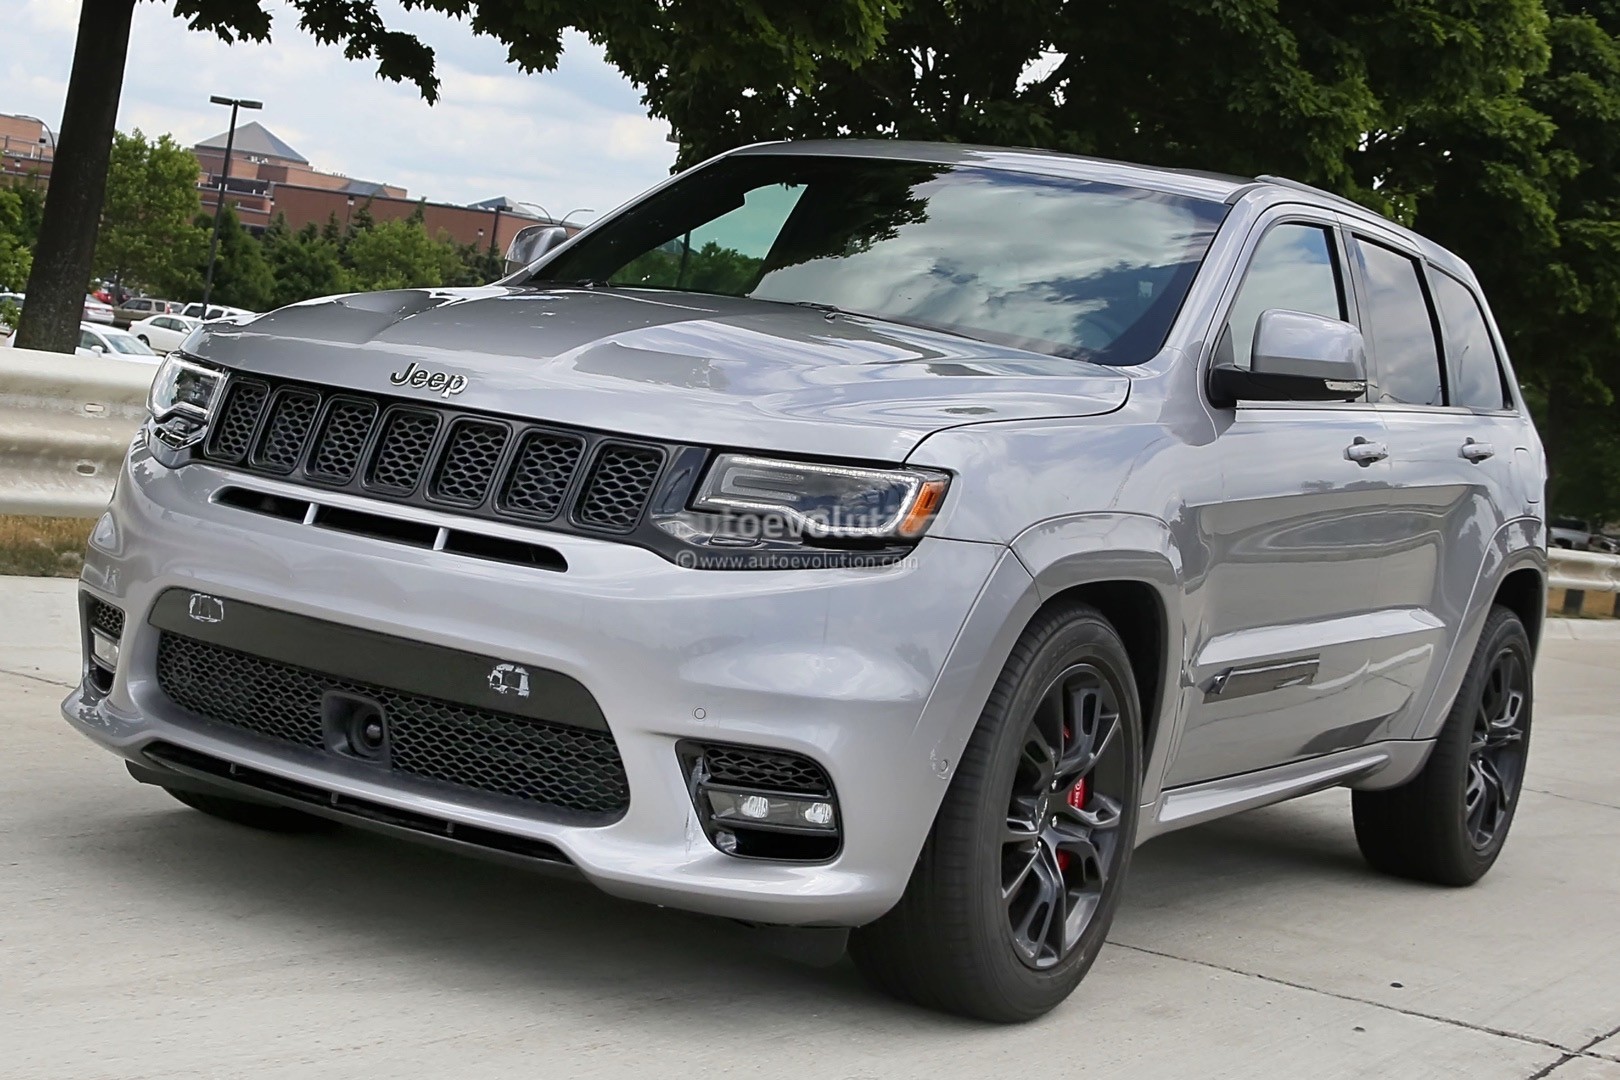 2018 Jeep Grand Cherokee Trackhawk Confirmed For New York Debut